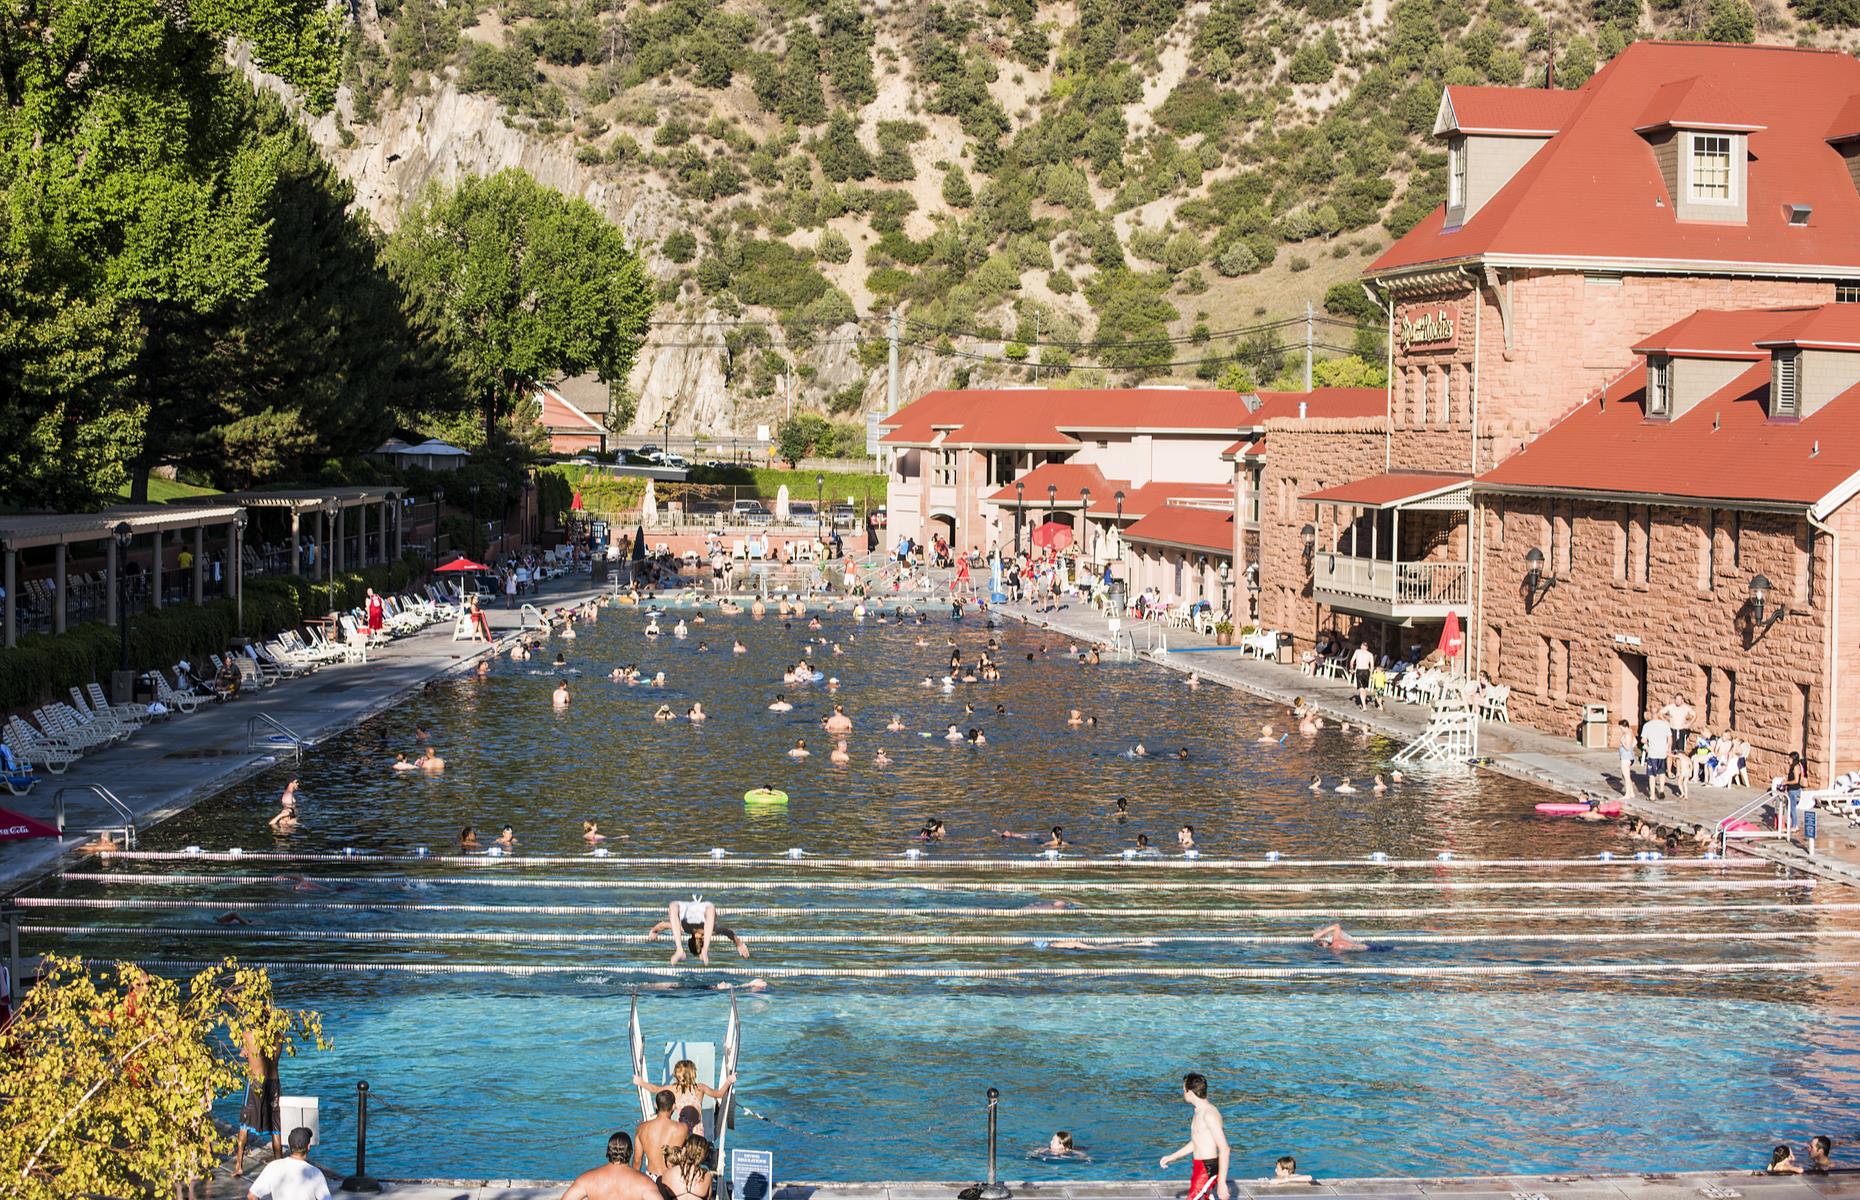 <p>Fancy a thermal-themed road trip? You can explore 19 of Colorado’s hot springs (there are over 30) from the Historic Hot Springs loop, a 720-mile route taking in some of the best in the state. Make sure you visit Glenwood Hot Springs, which is one of the world’s largest mineral baths and open year-round. The gigantic main pool contains a staggering one million gallons of water (at 90°F), while the warmer therapy pool is 100 feet (30m) long.</p>